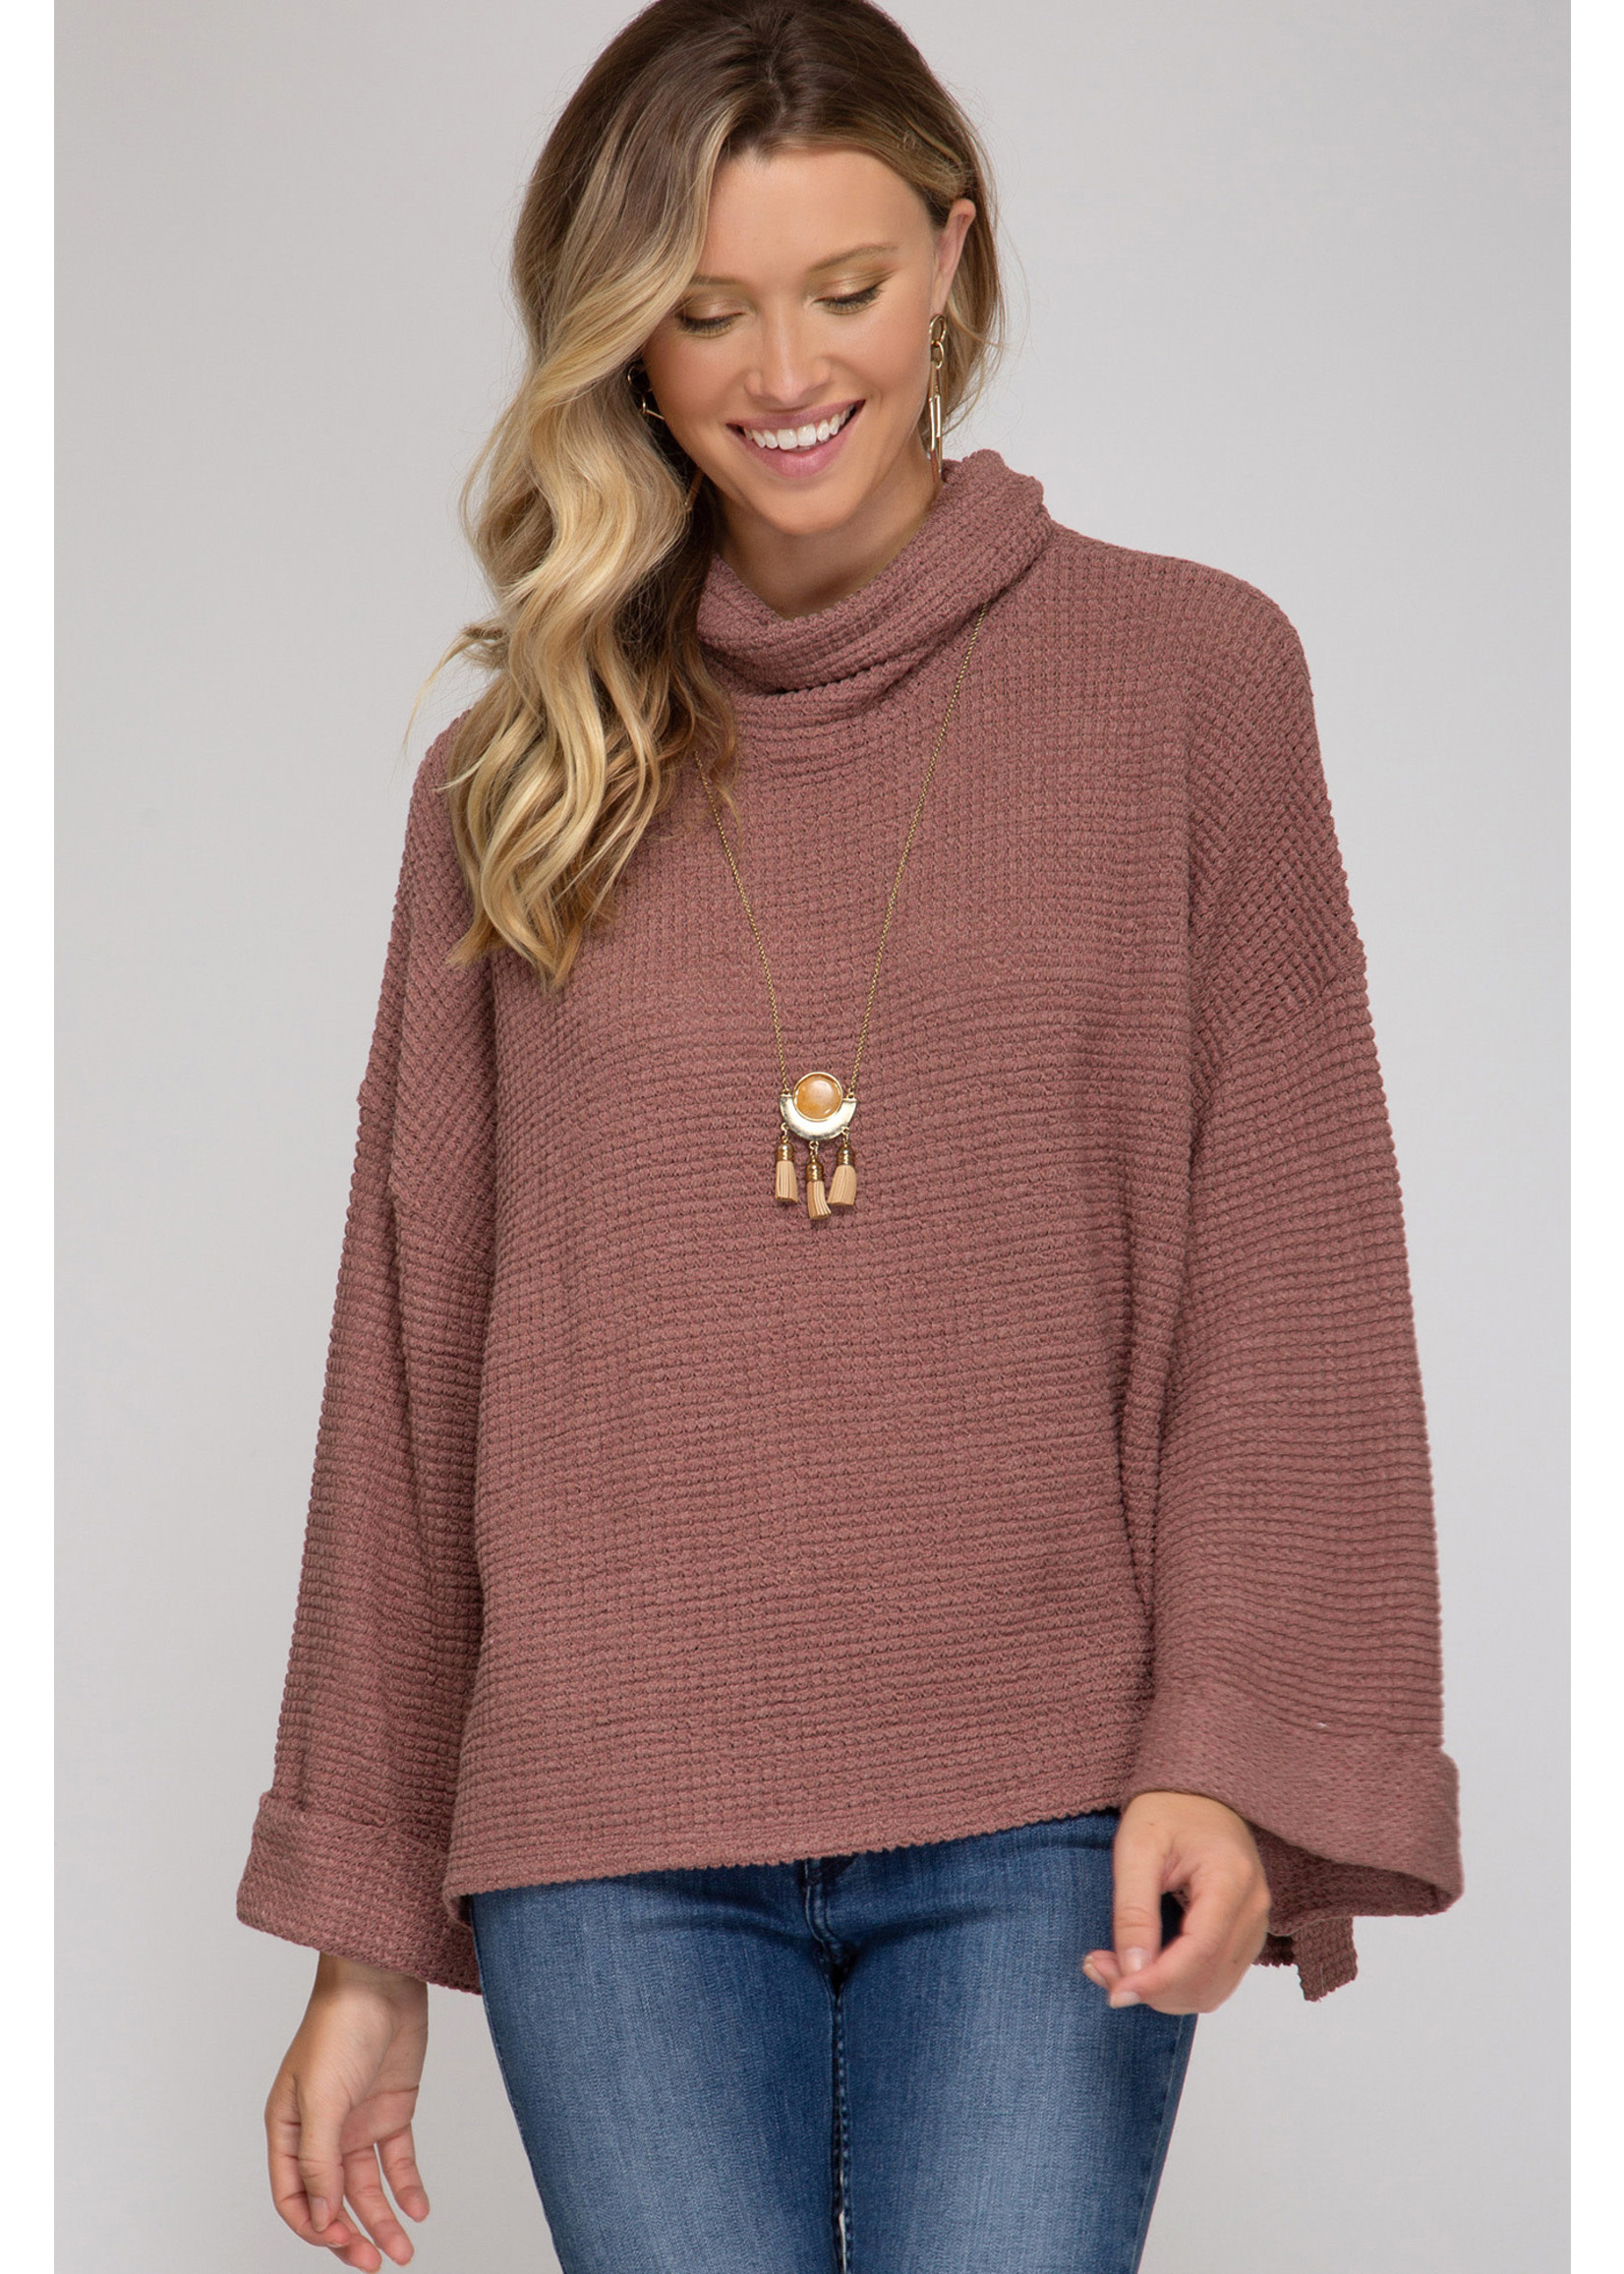 She & Sky Thermal Knit Top